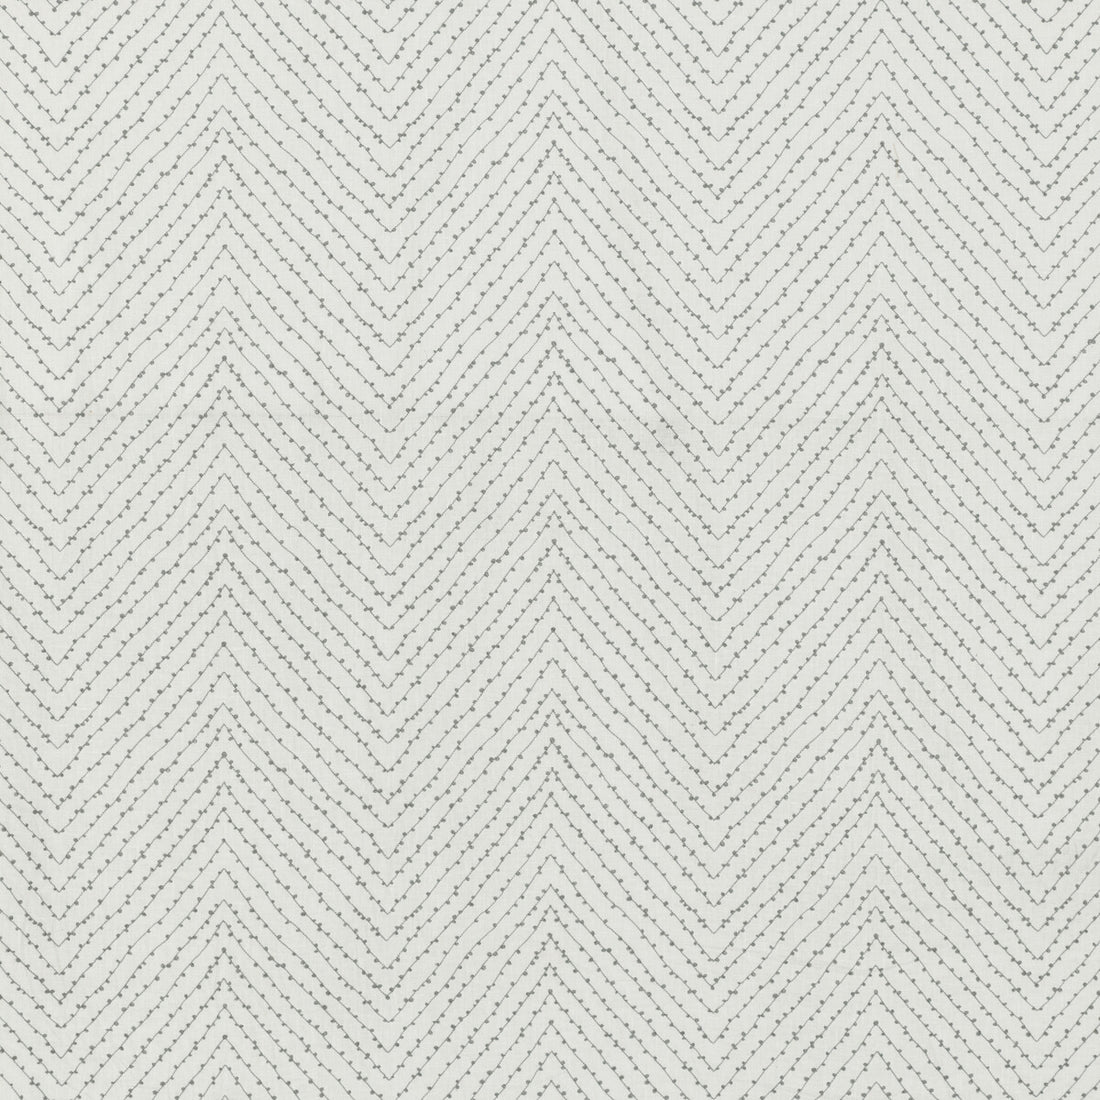 Stringknot fabric in fog color - pattern 4851.11.0 - by Kravet Basics in the Monterey collection